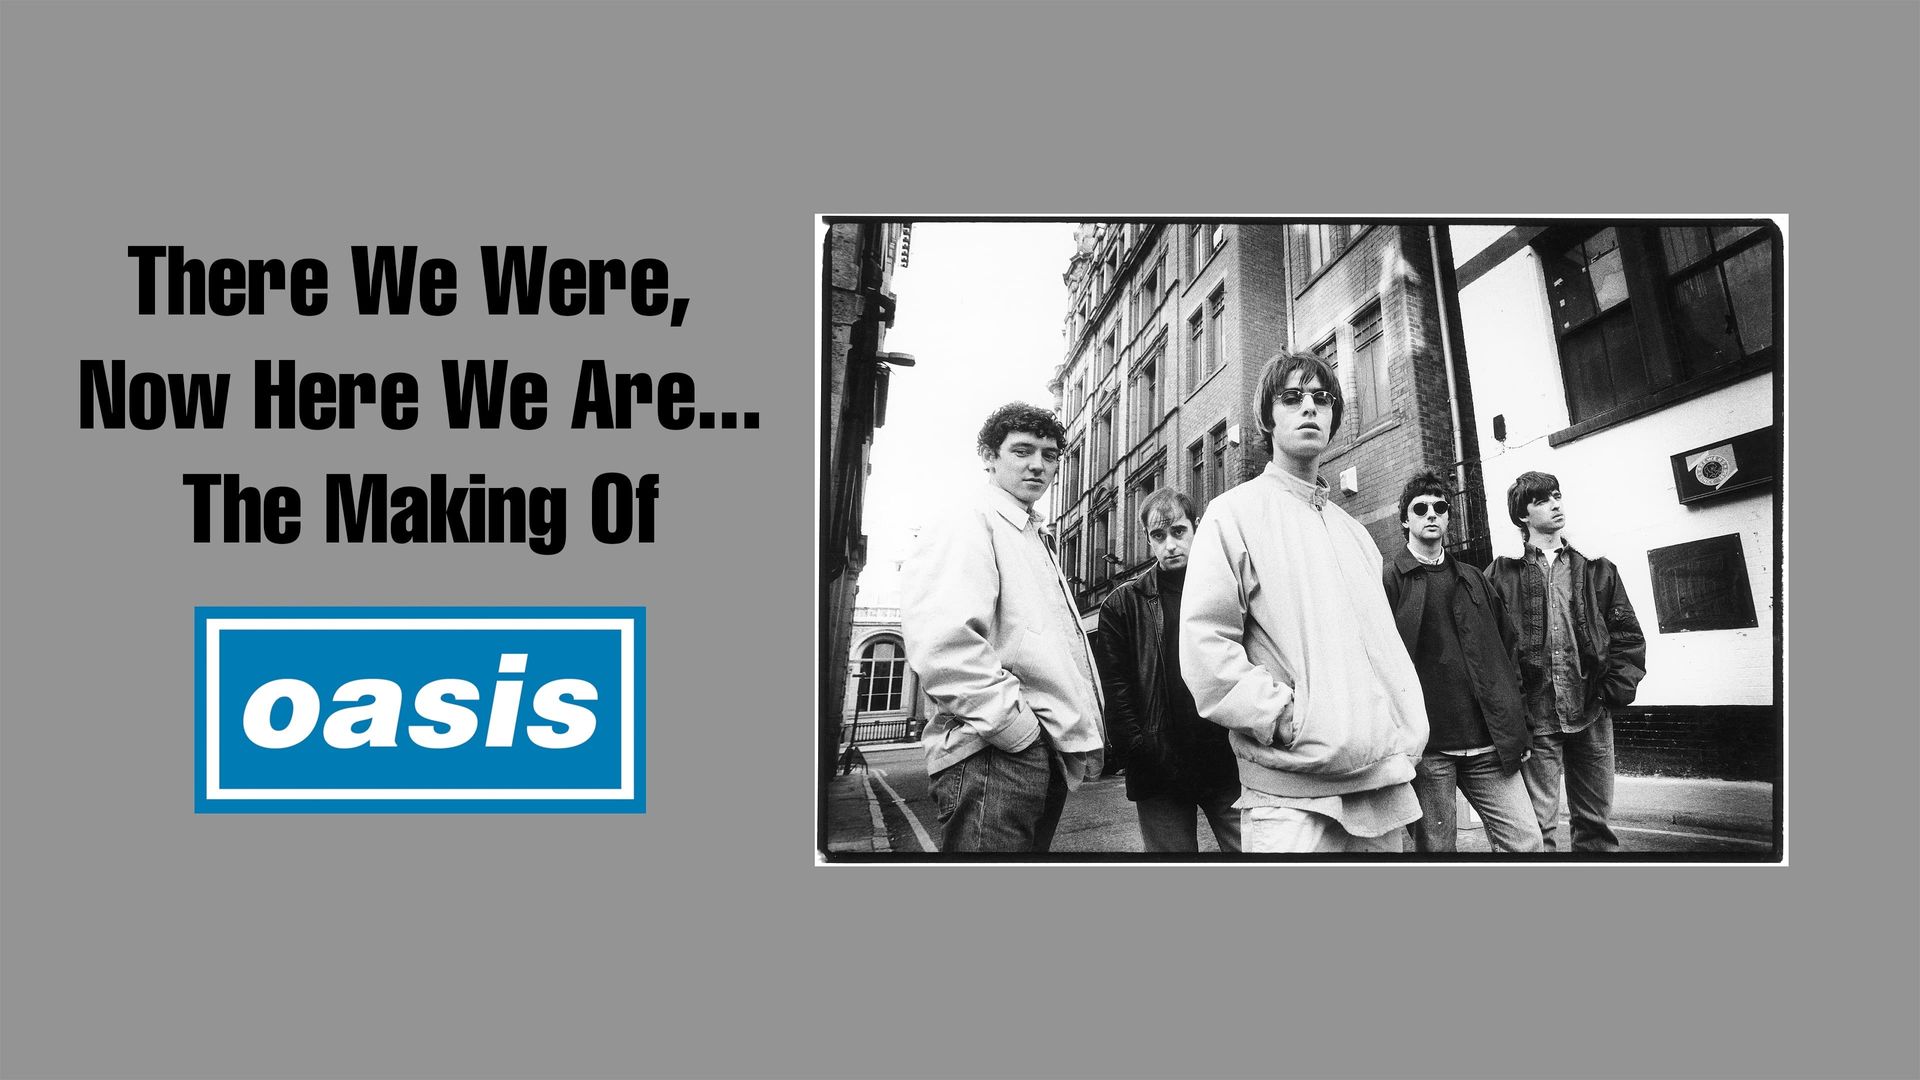 There We Were, Now Here We Are... The Making of Oasis background